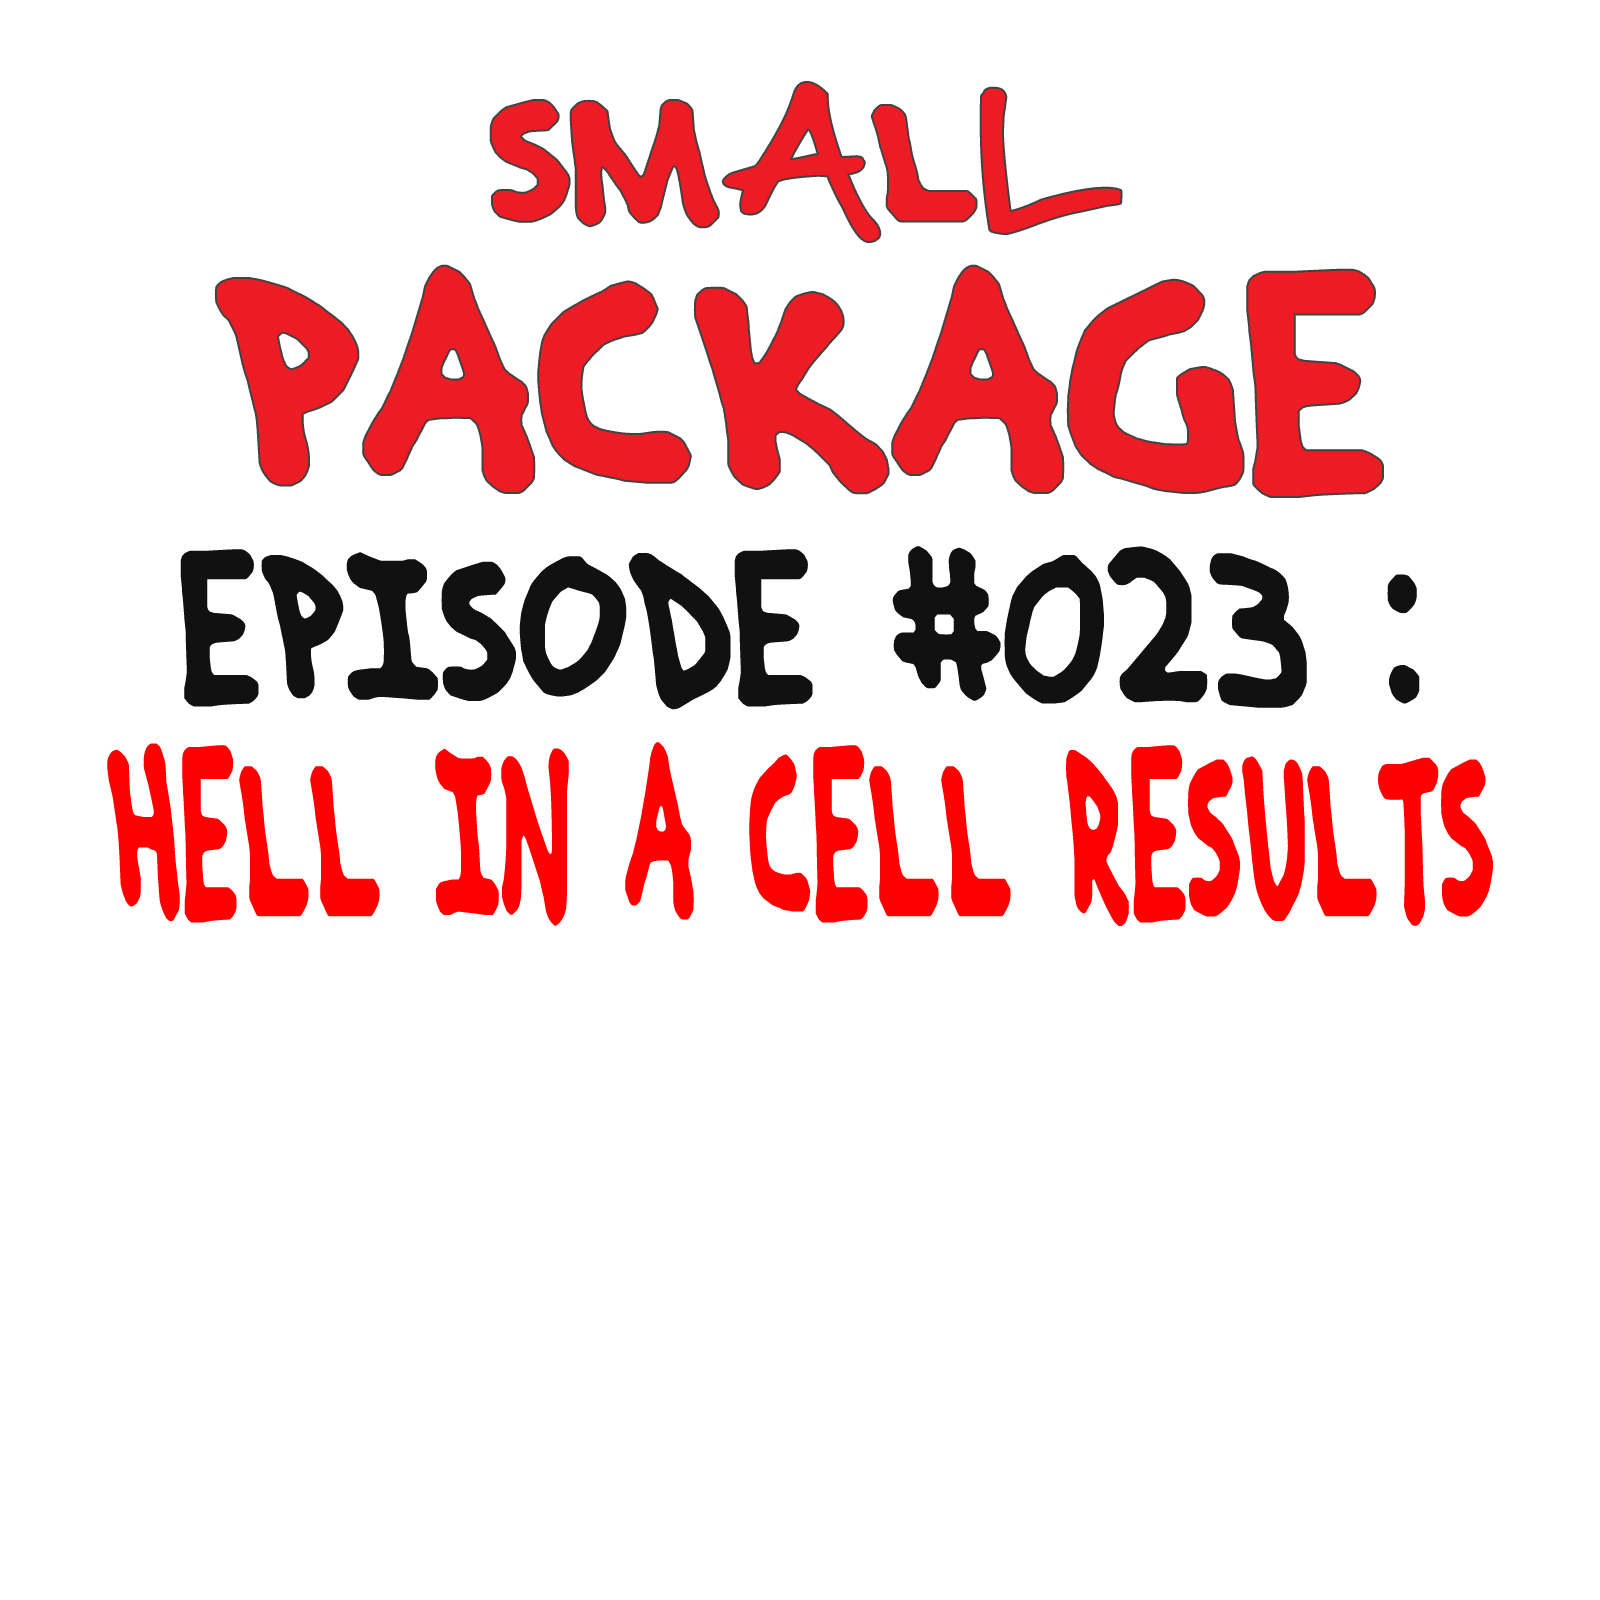 Episode 023: HELL IN A CELL REVIEW [11/02/16]